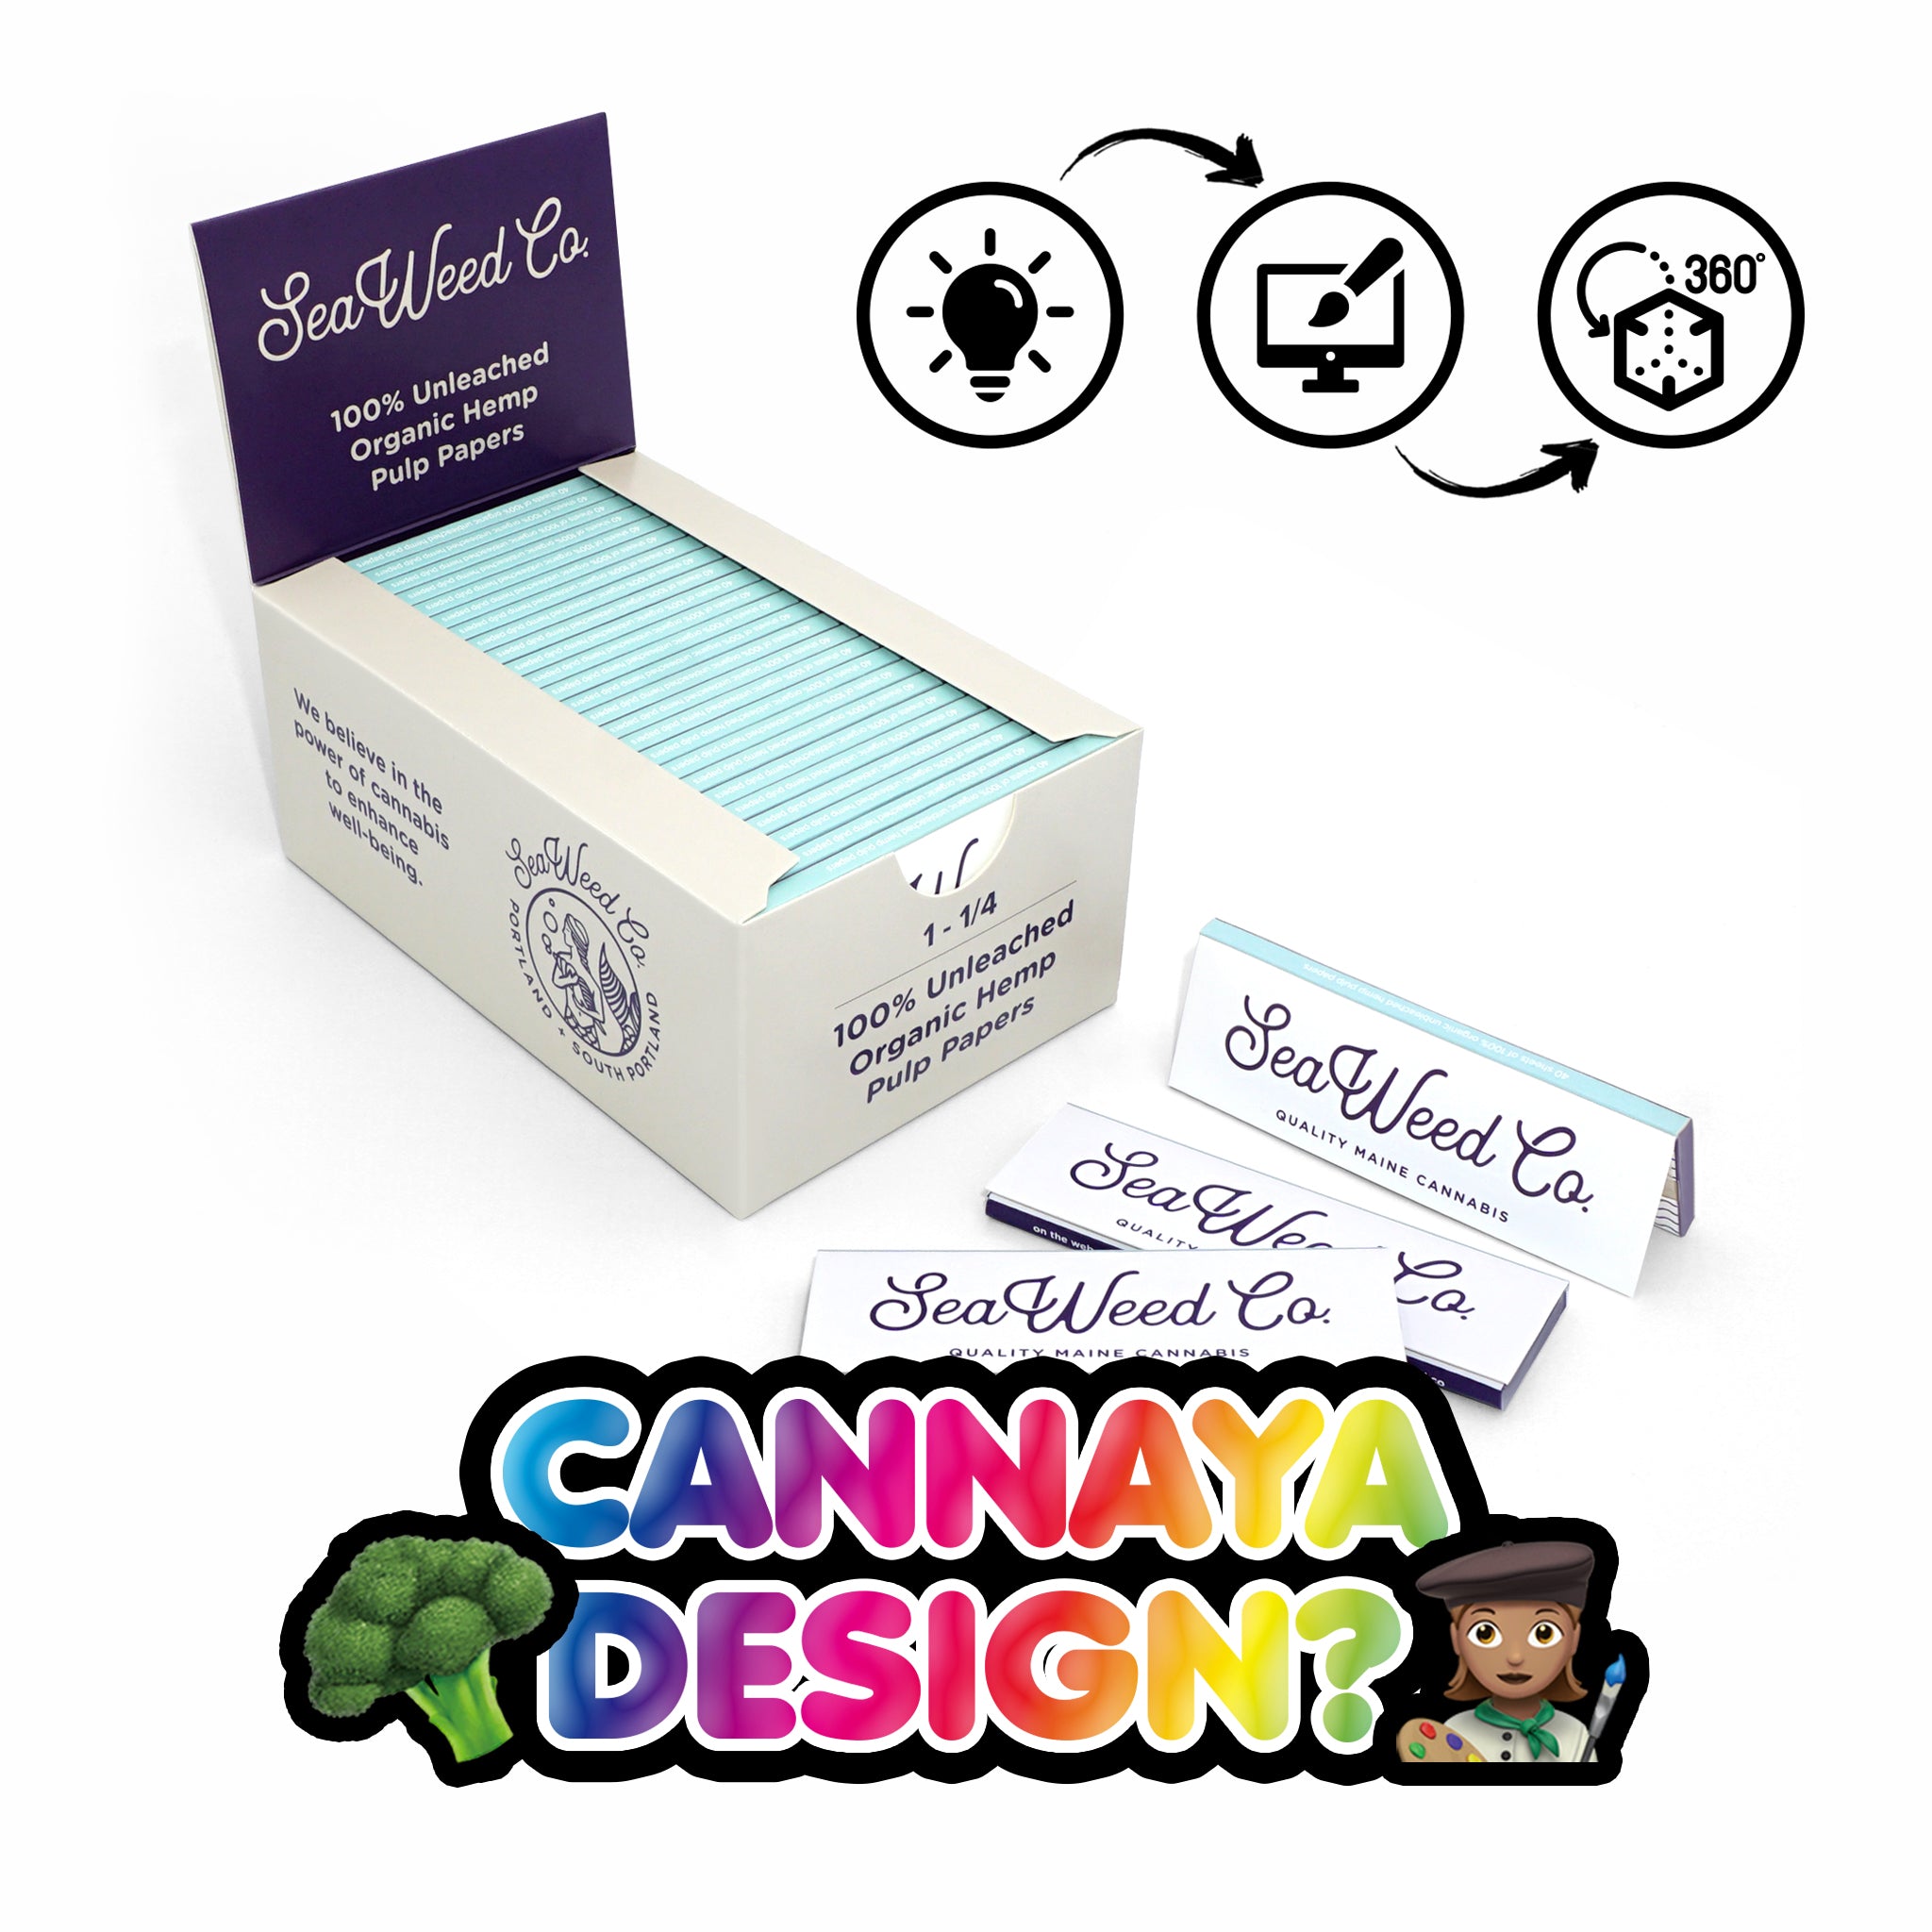 🥦 CANNAYA DESIGN? 👩‍🎨 - Custom Printed Booklets in One and a Quarter Size